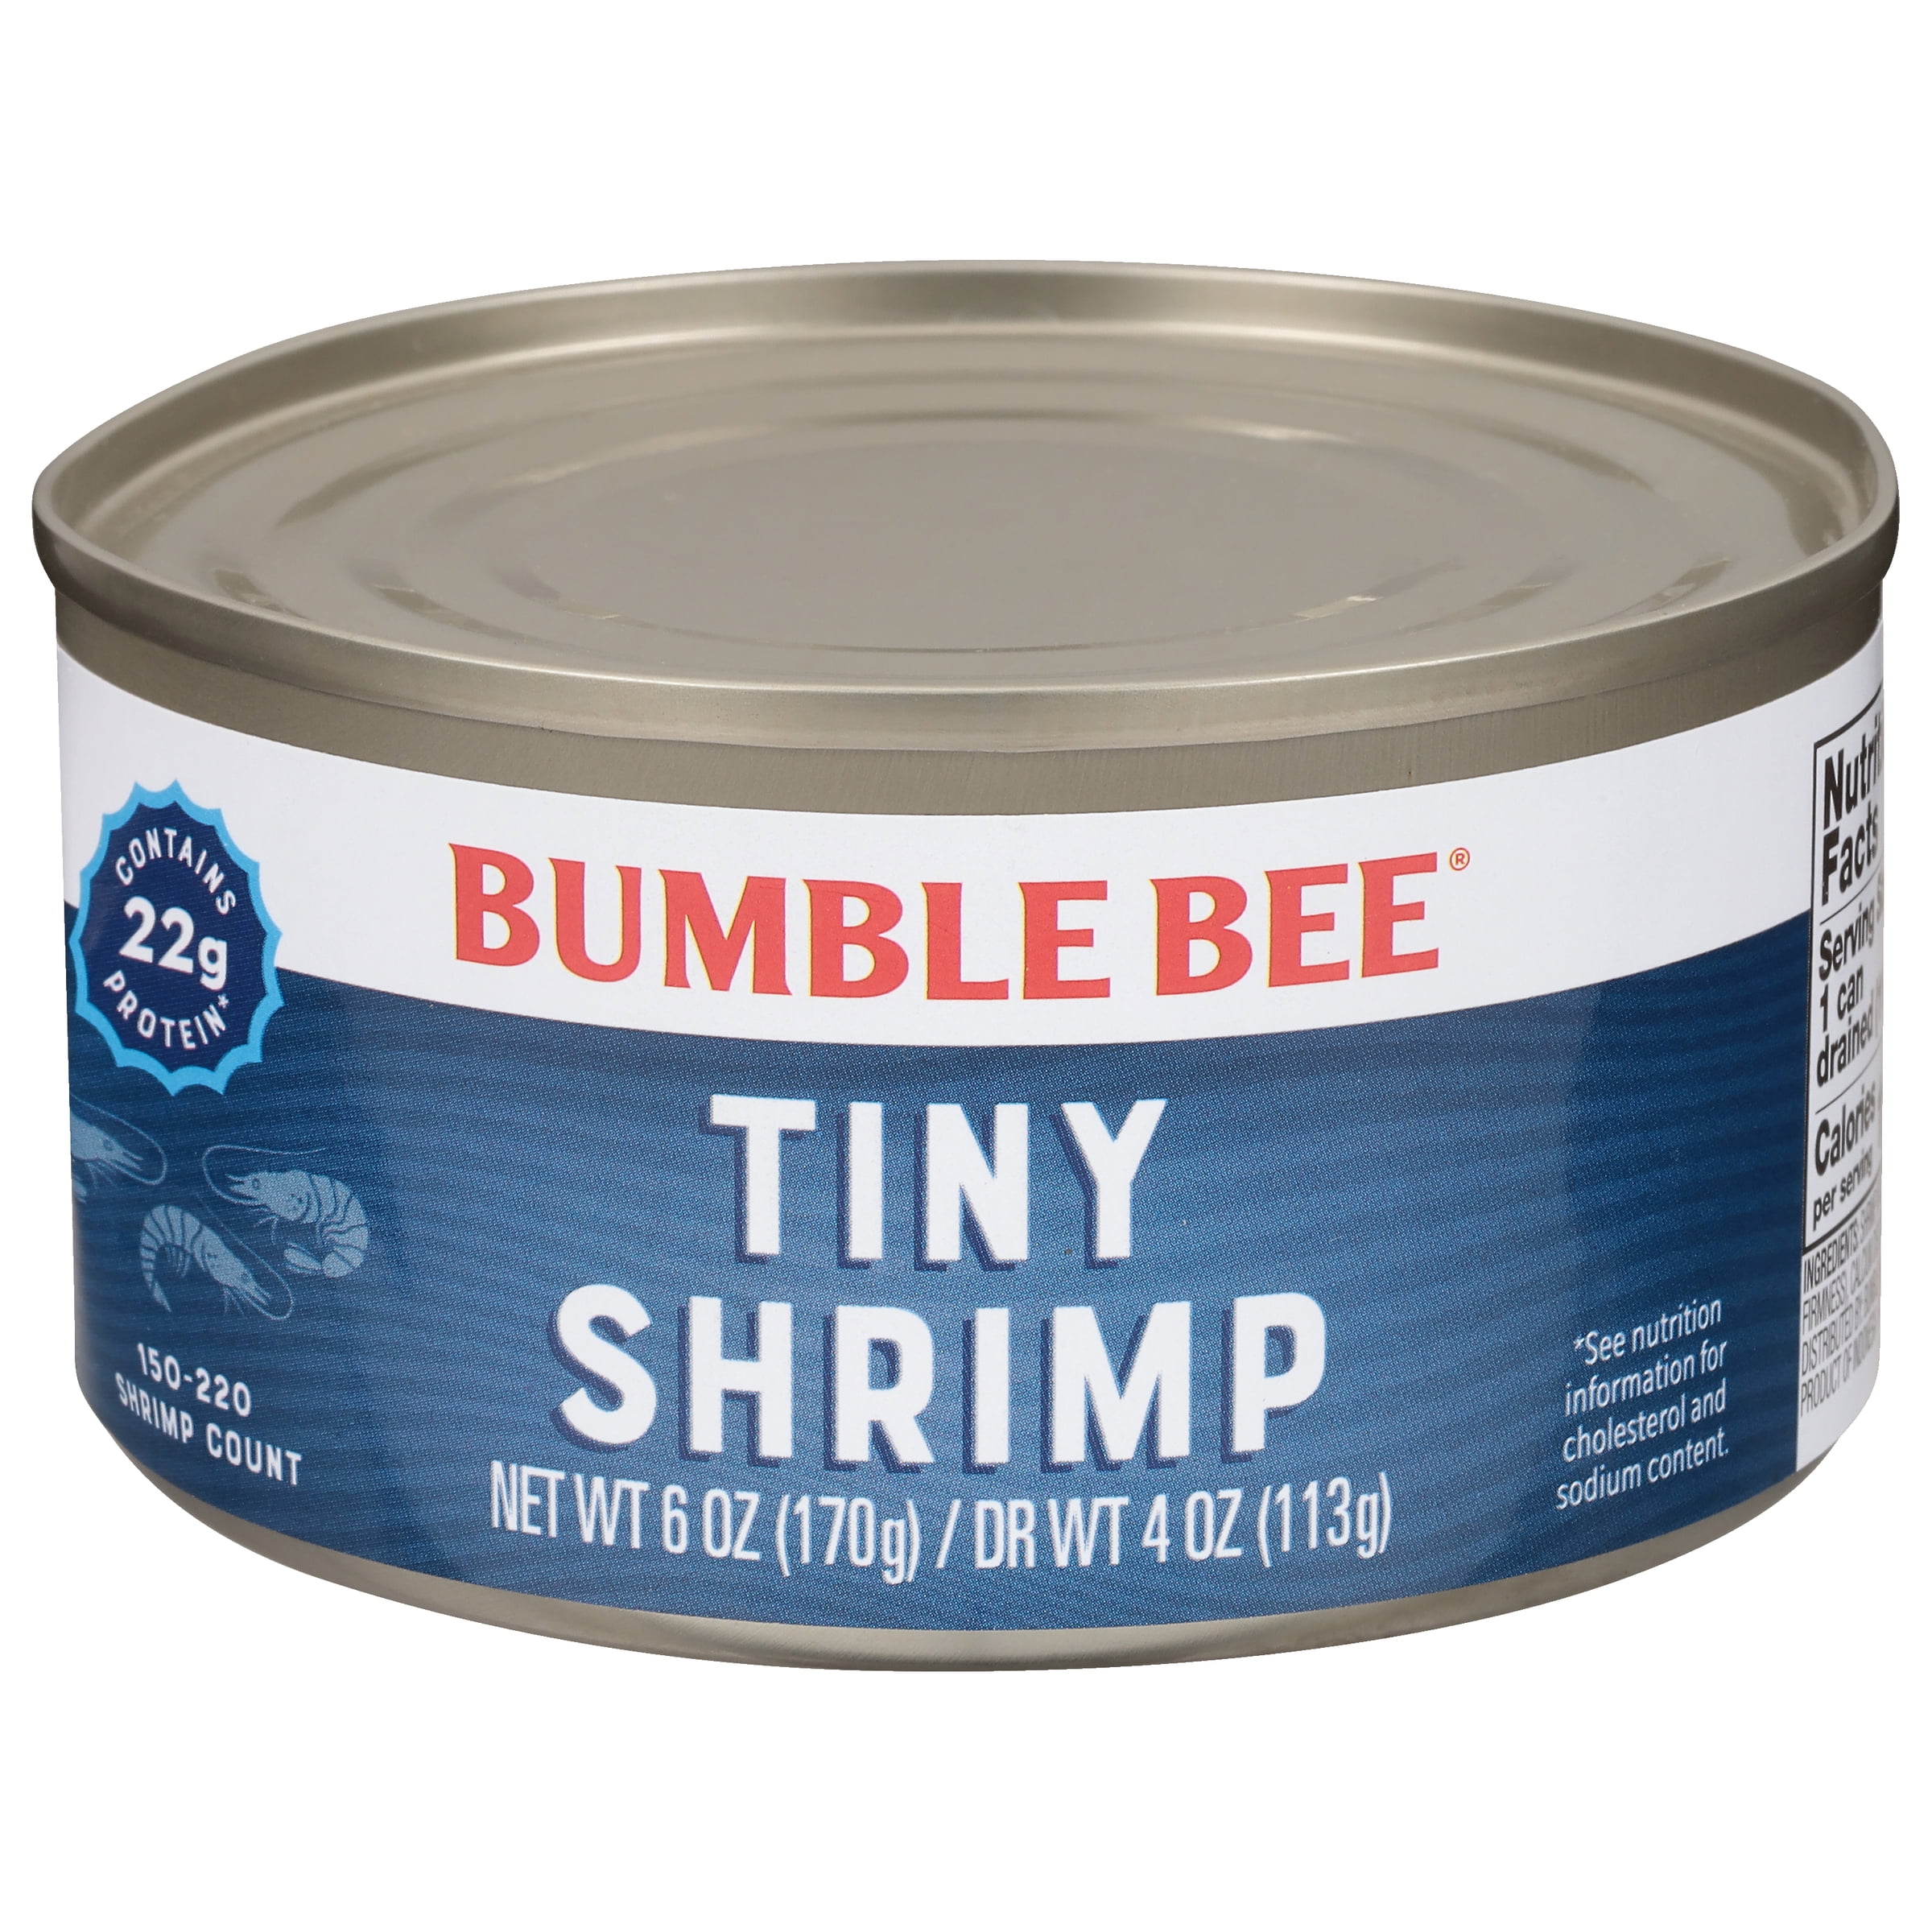 Bumble Bee Tiny Canned Shrimp, 4 oz Can